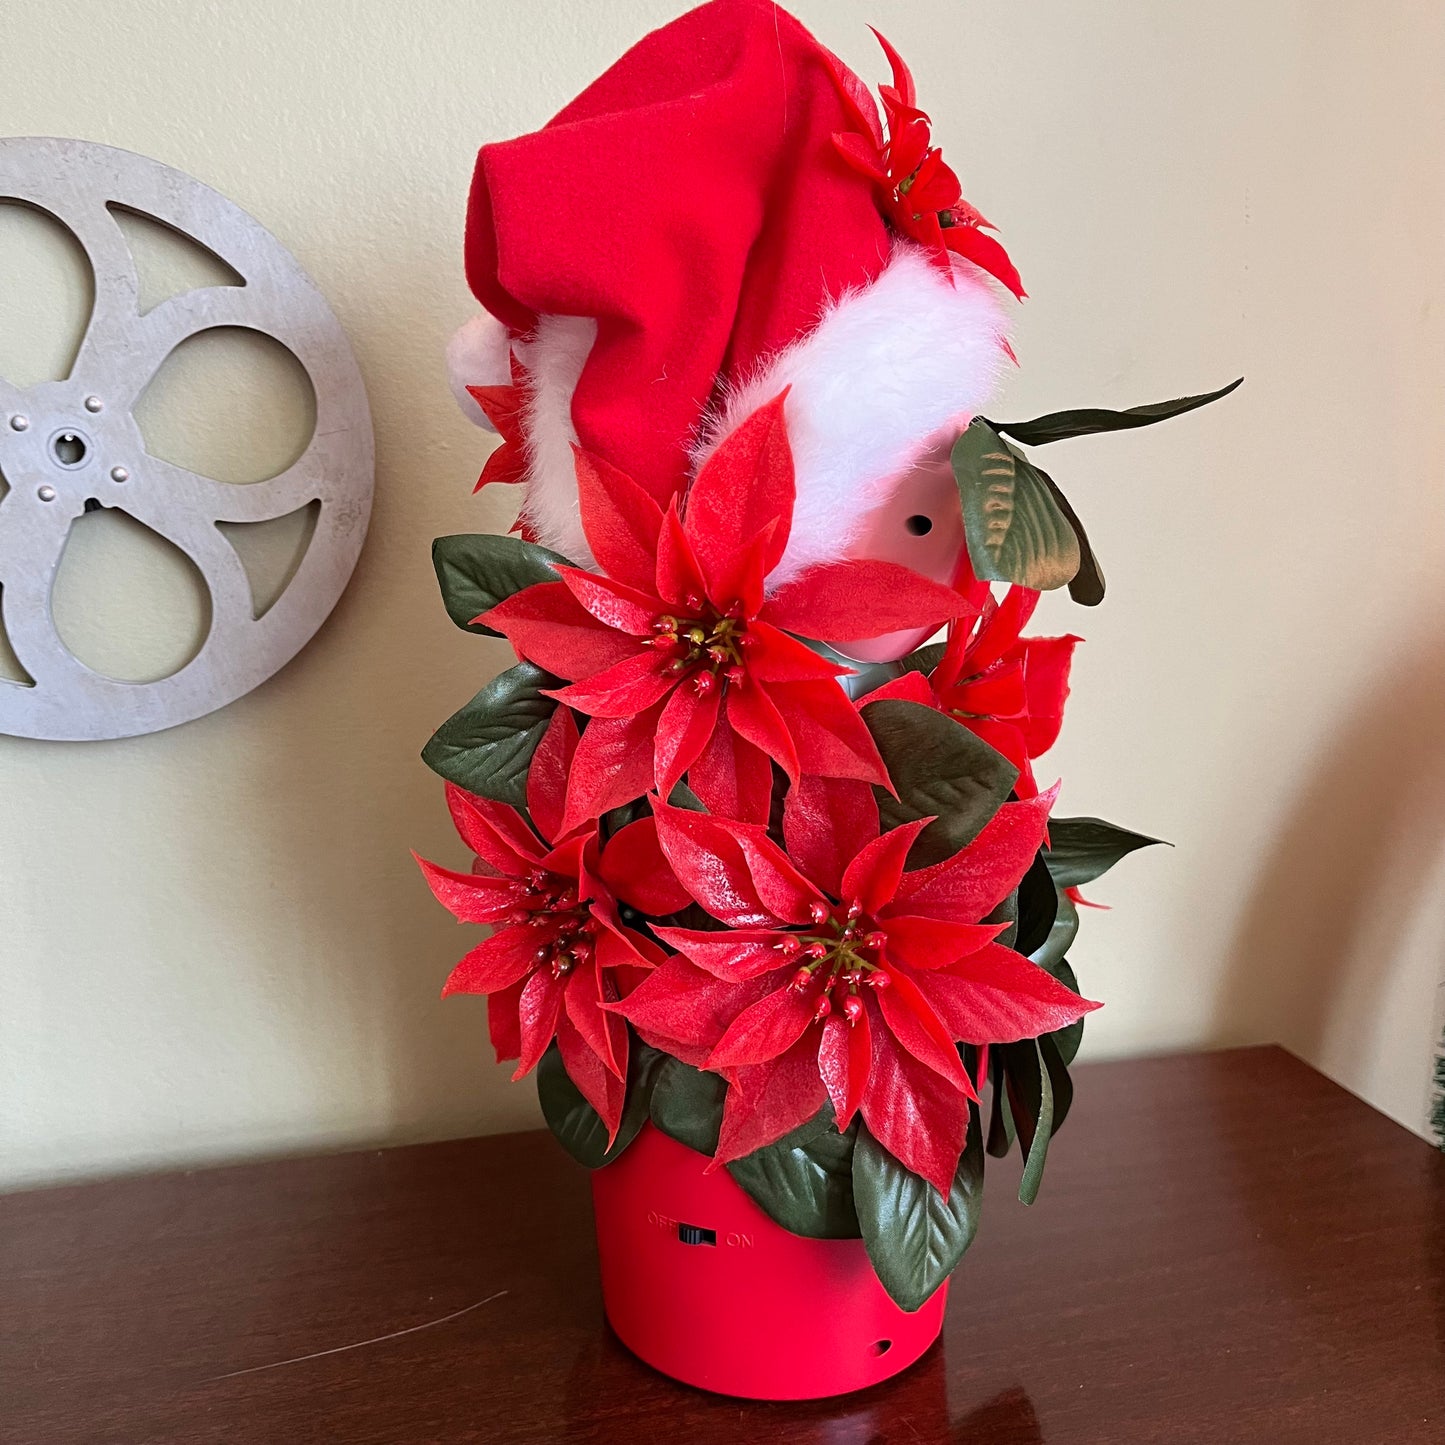 Vintage 90s Redd The Talking Motion Activated Poinsettia